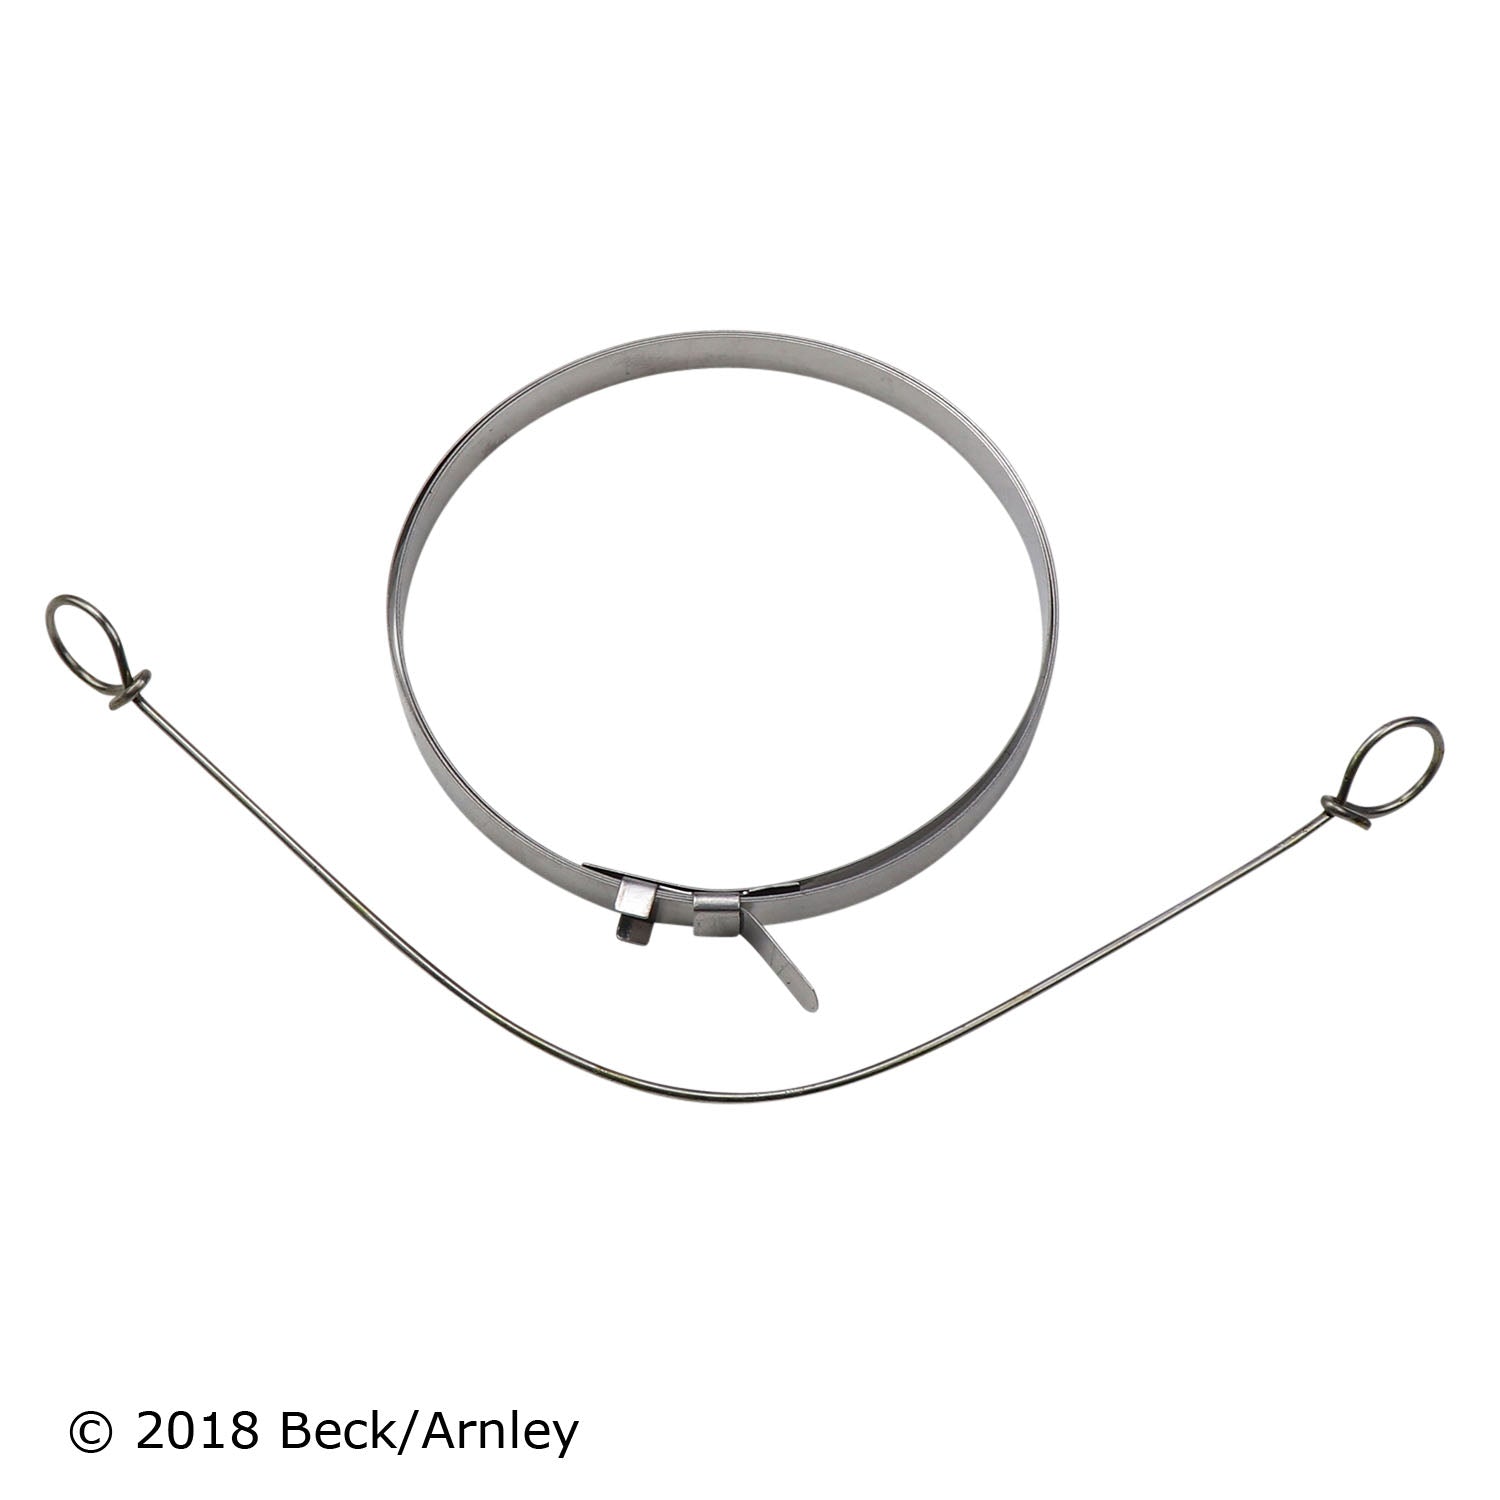 Beck Arnley 103-2902 Front Rack and Pinion Bellows Kit for Ford Ranger Mazda B2300 B2500 B3000 B4000